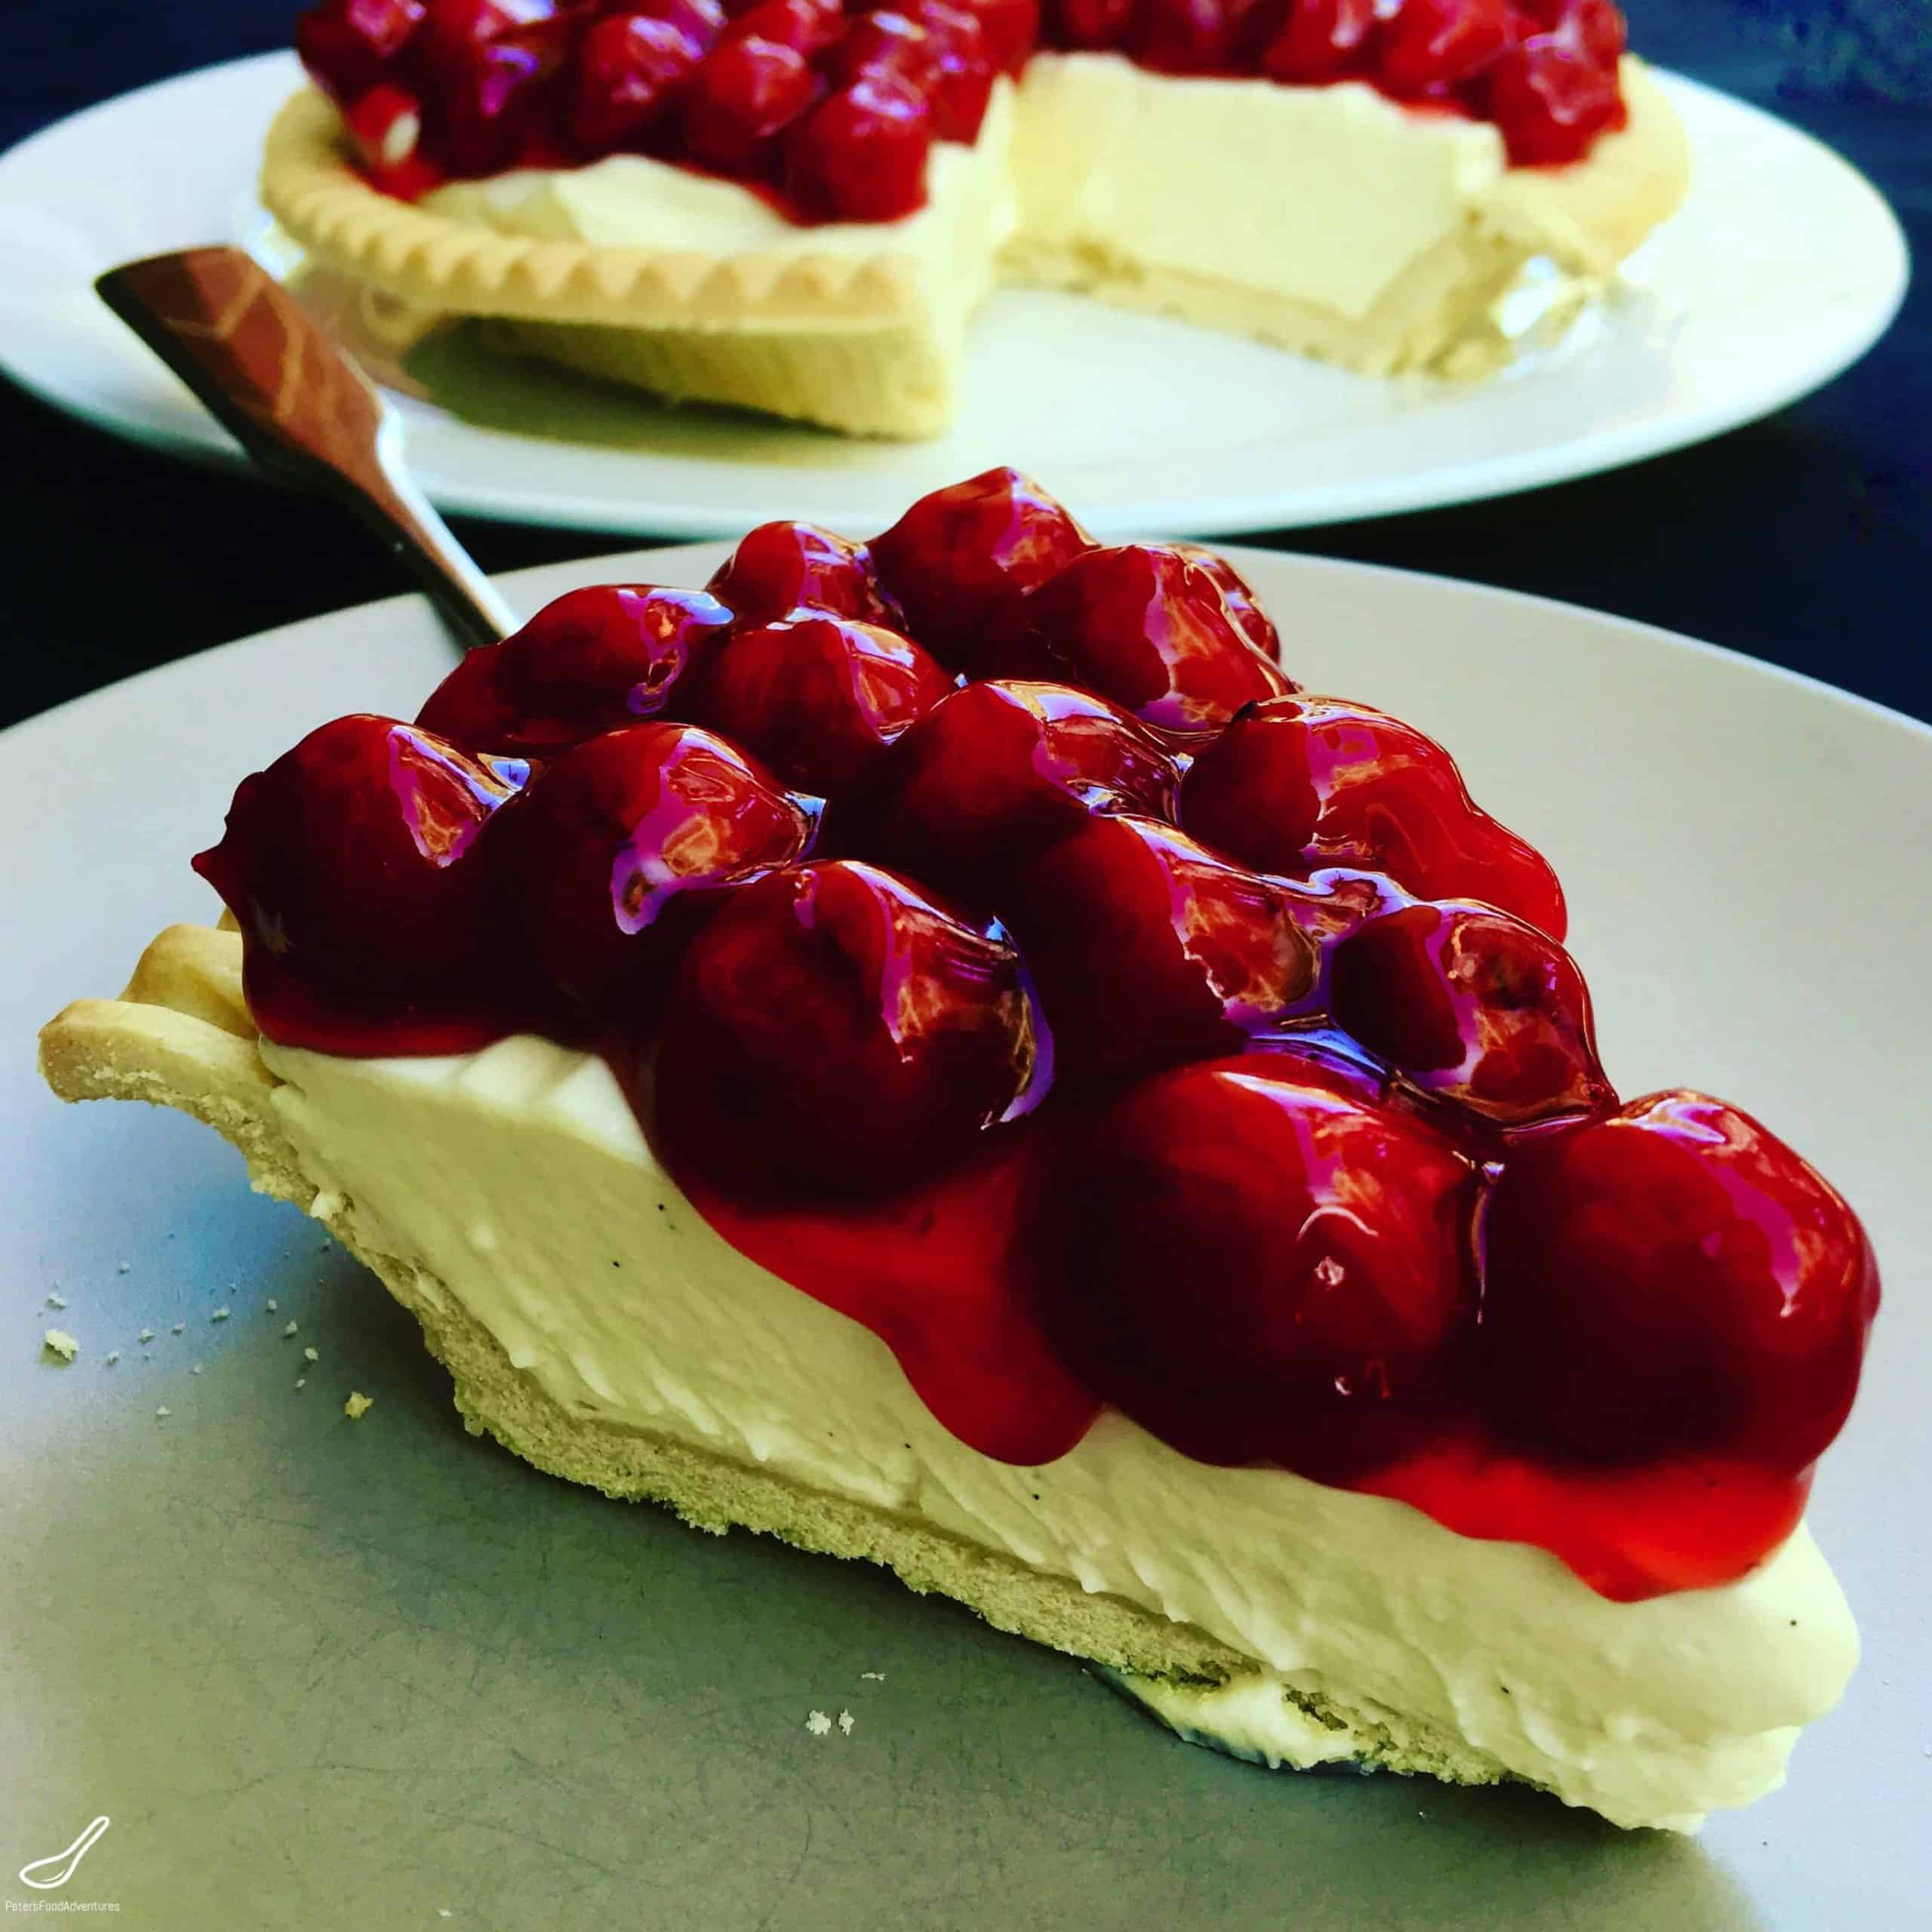 Easy No-Bake Cherry Cheesecake takes only 5 minutes to make! It's incredibly easy and a tasty crowd pleaser. Only 4 ingredients for the filling, a great recipe to introduce 'baking' to the kids!